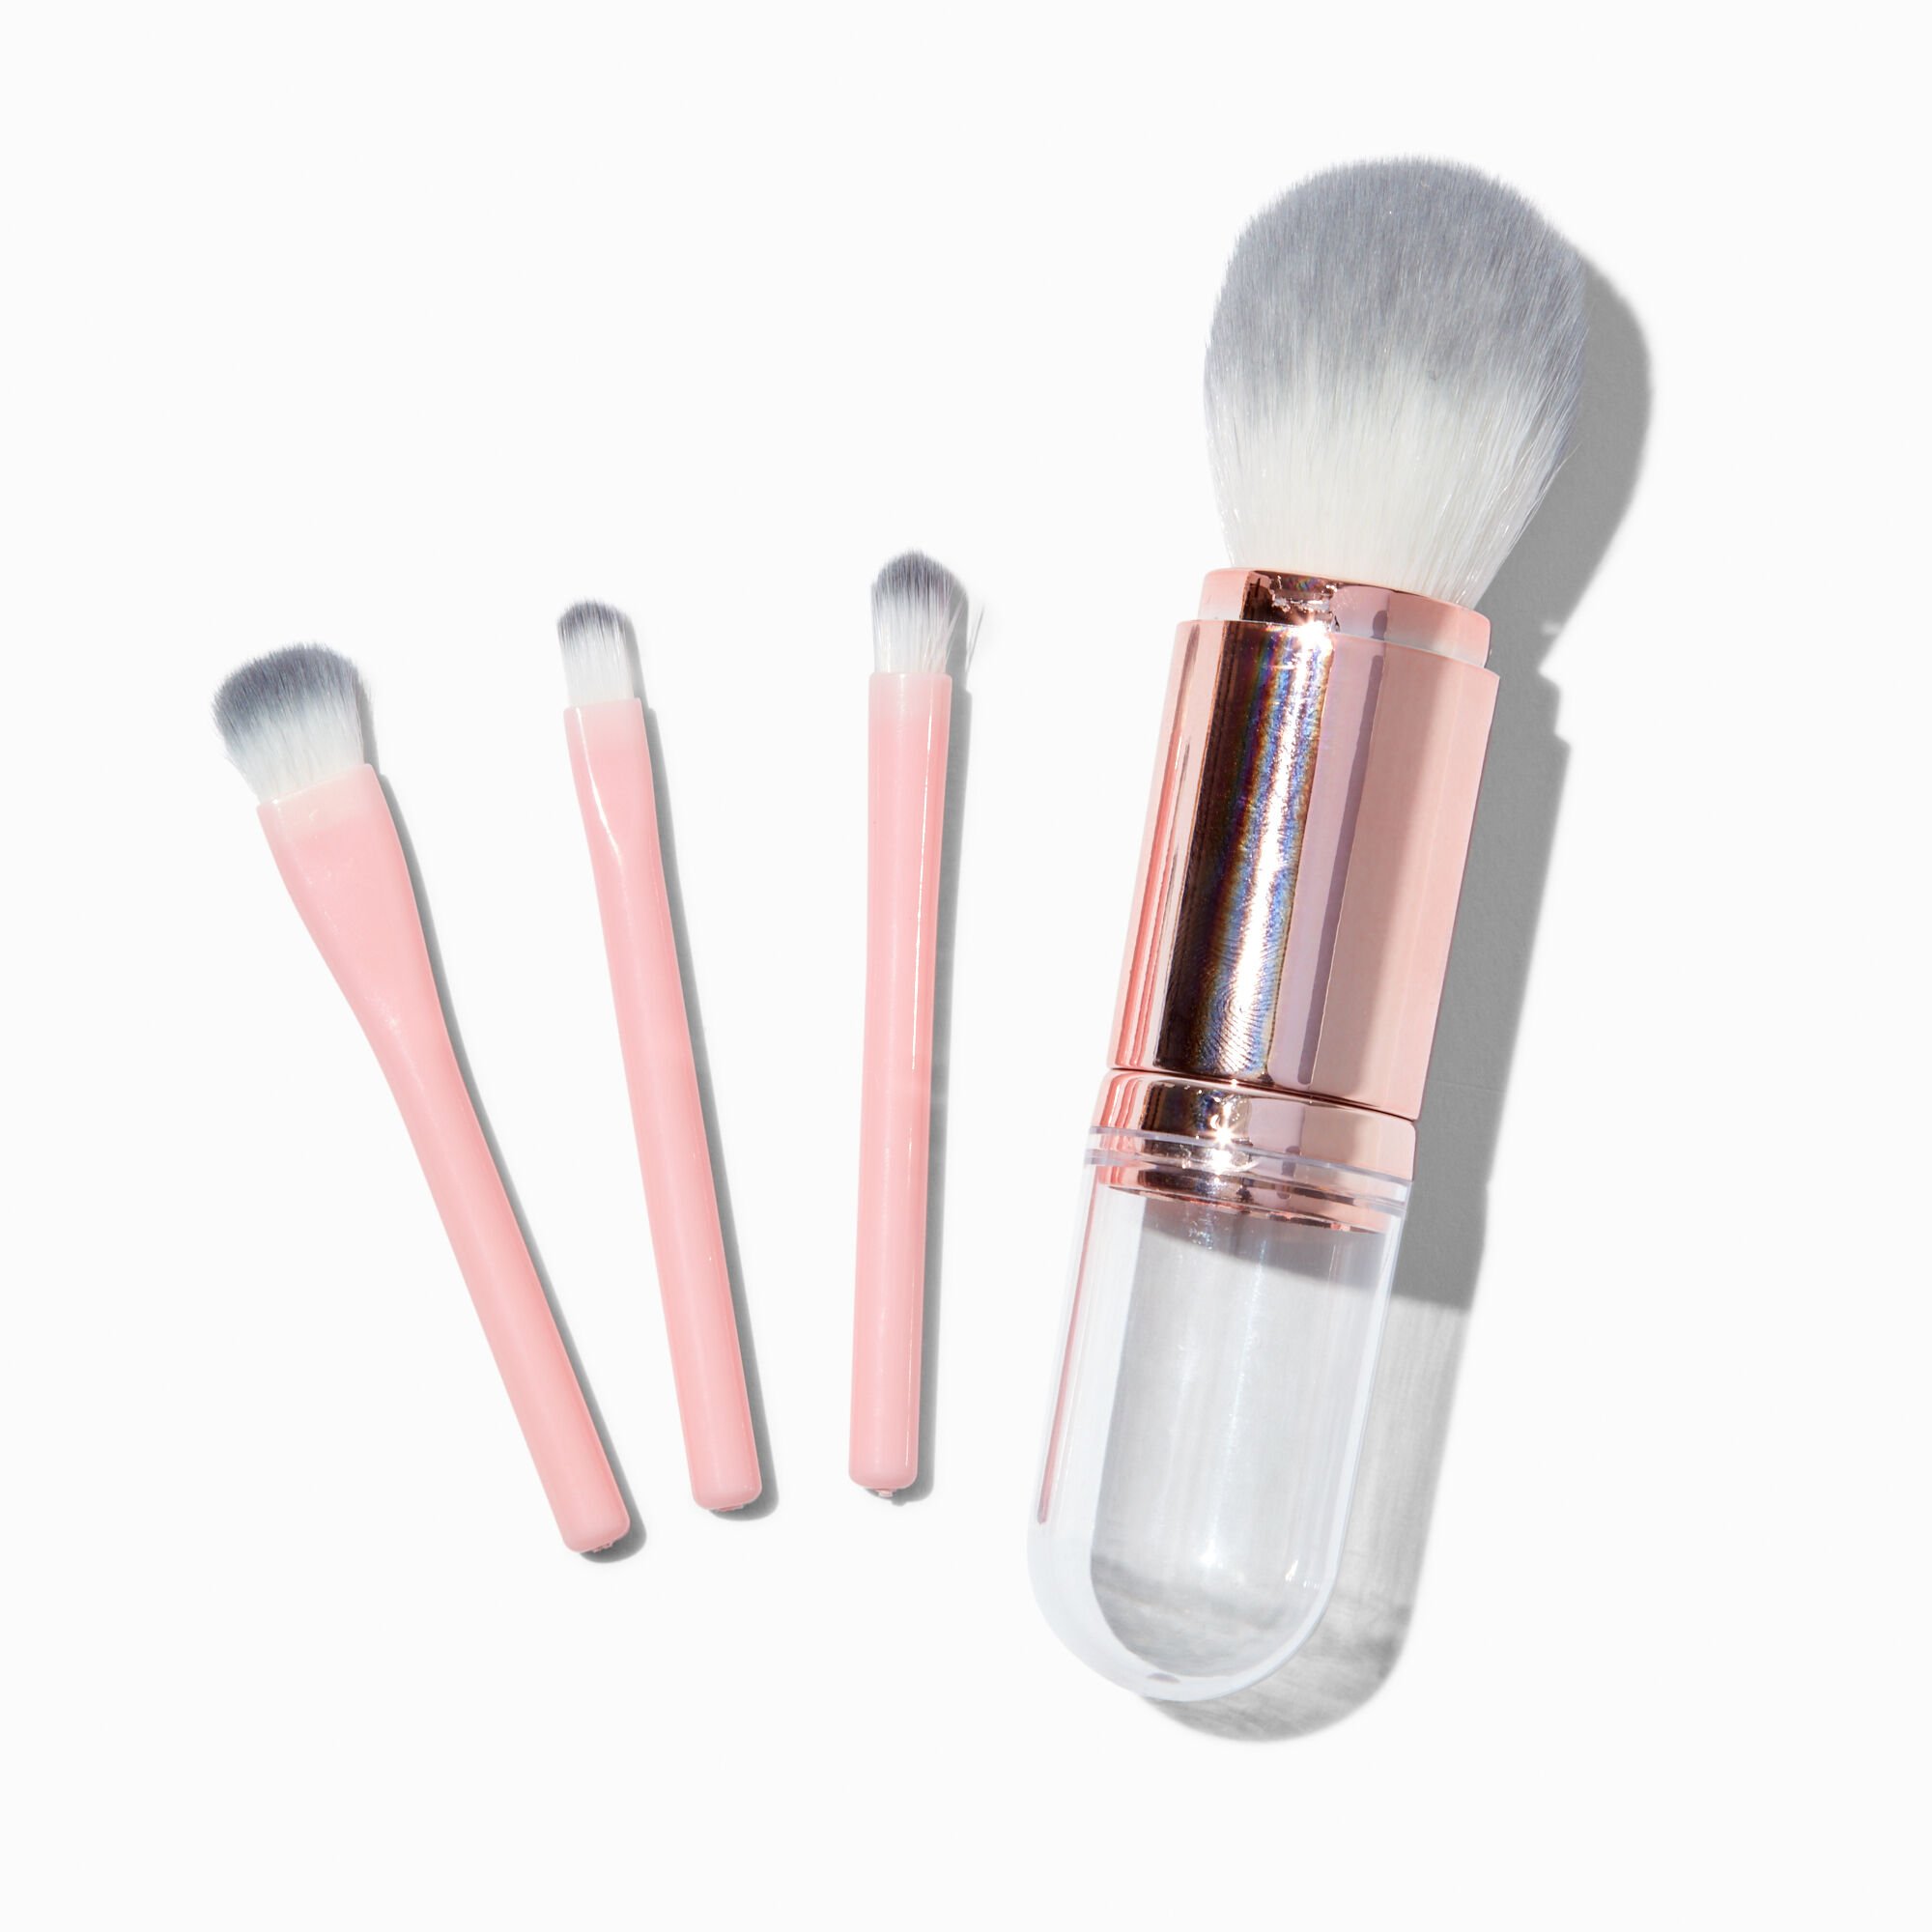 View Claires Blush Travel Makeup Brush Set 4 Pack information